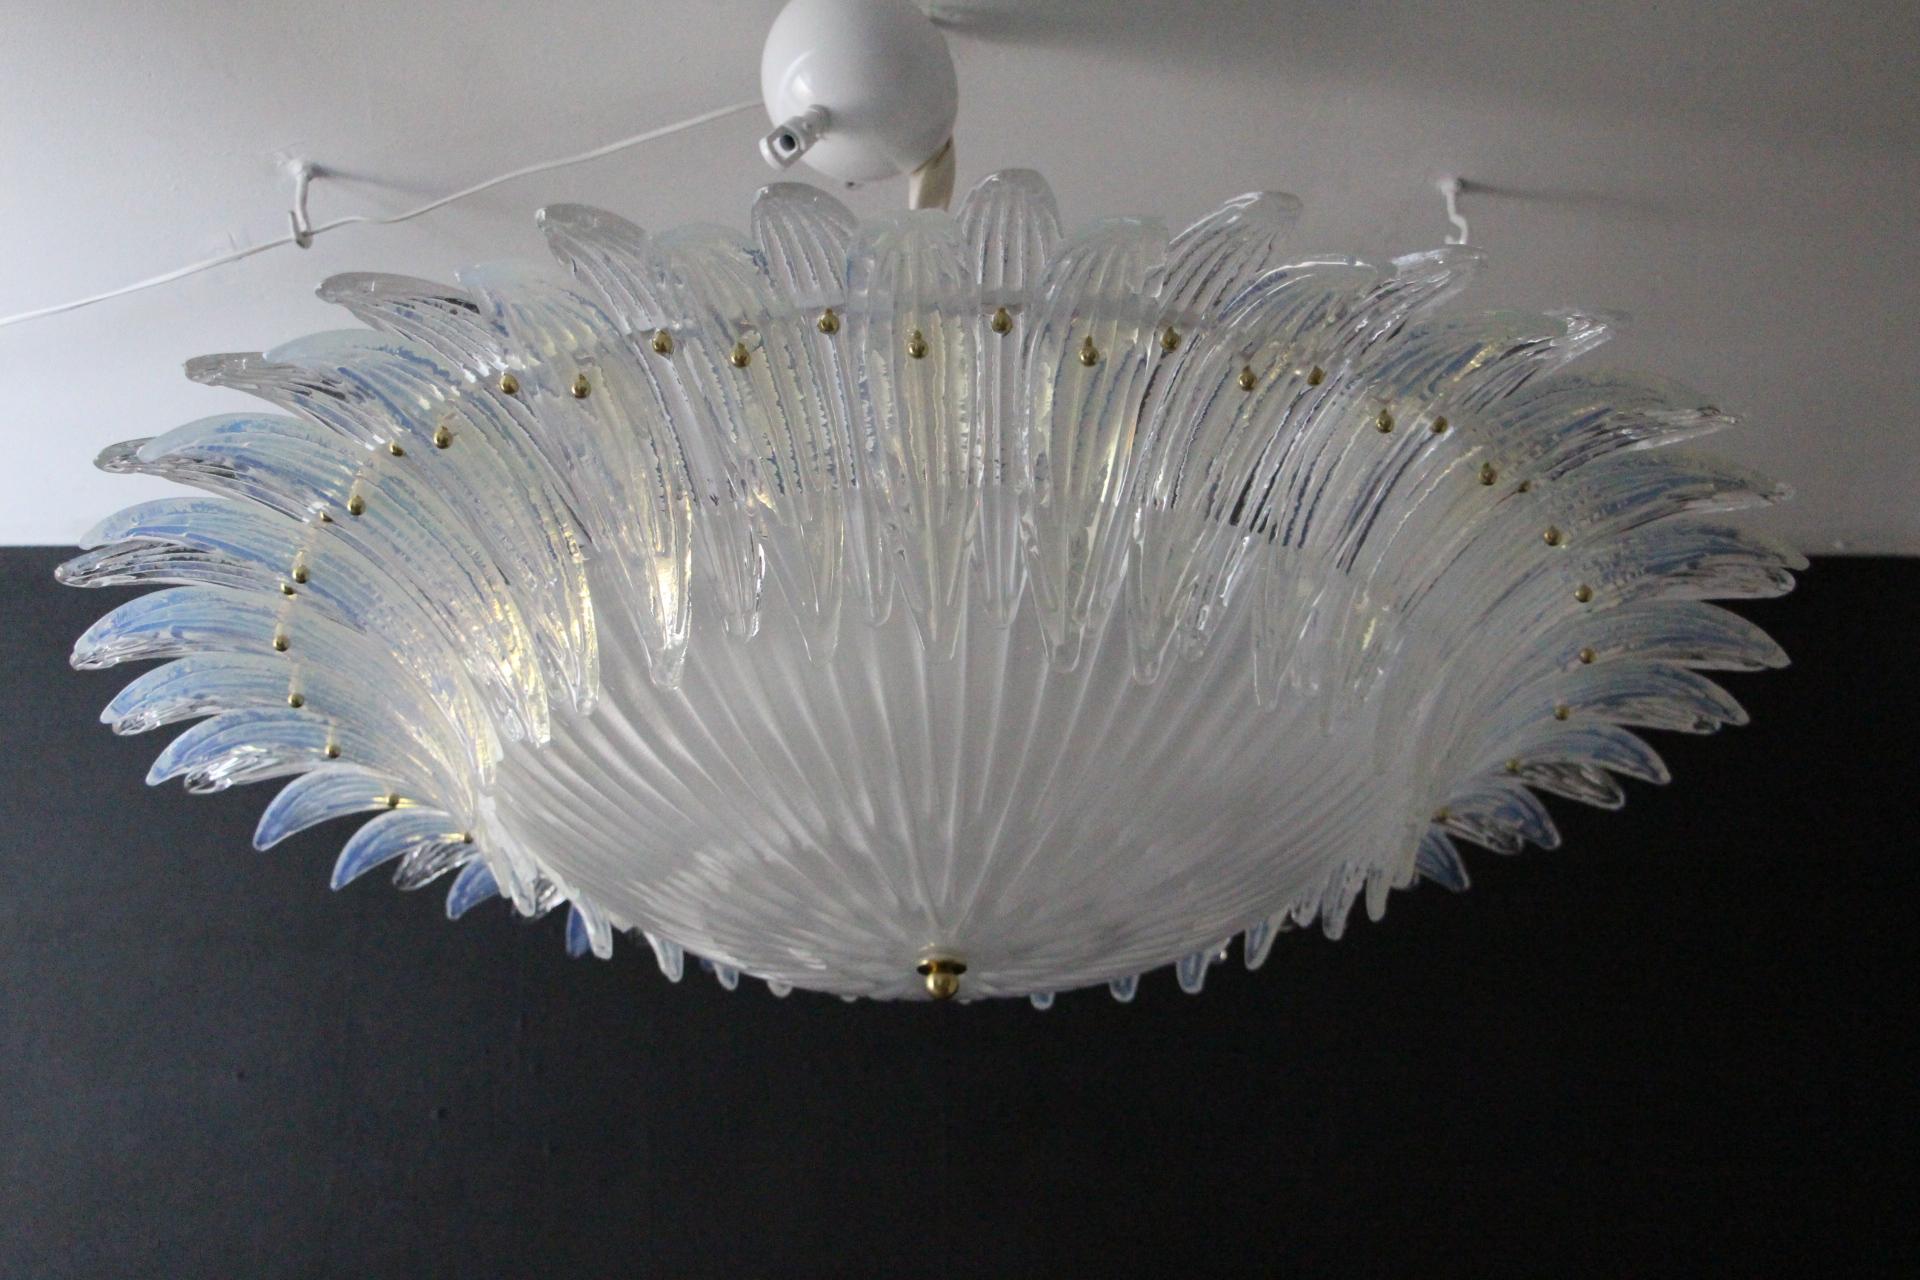 This spectacular chandelier features a large white central glass dome surounded by hand made white and iridescent glass palmettes. Each glass palmette is fixed with a brass stud. Glass palmettes are all textured and have been made by hand